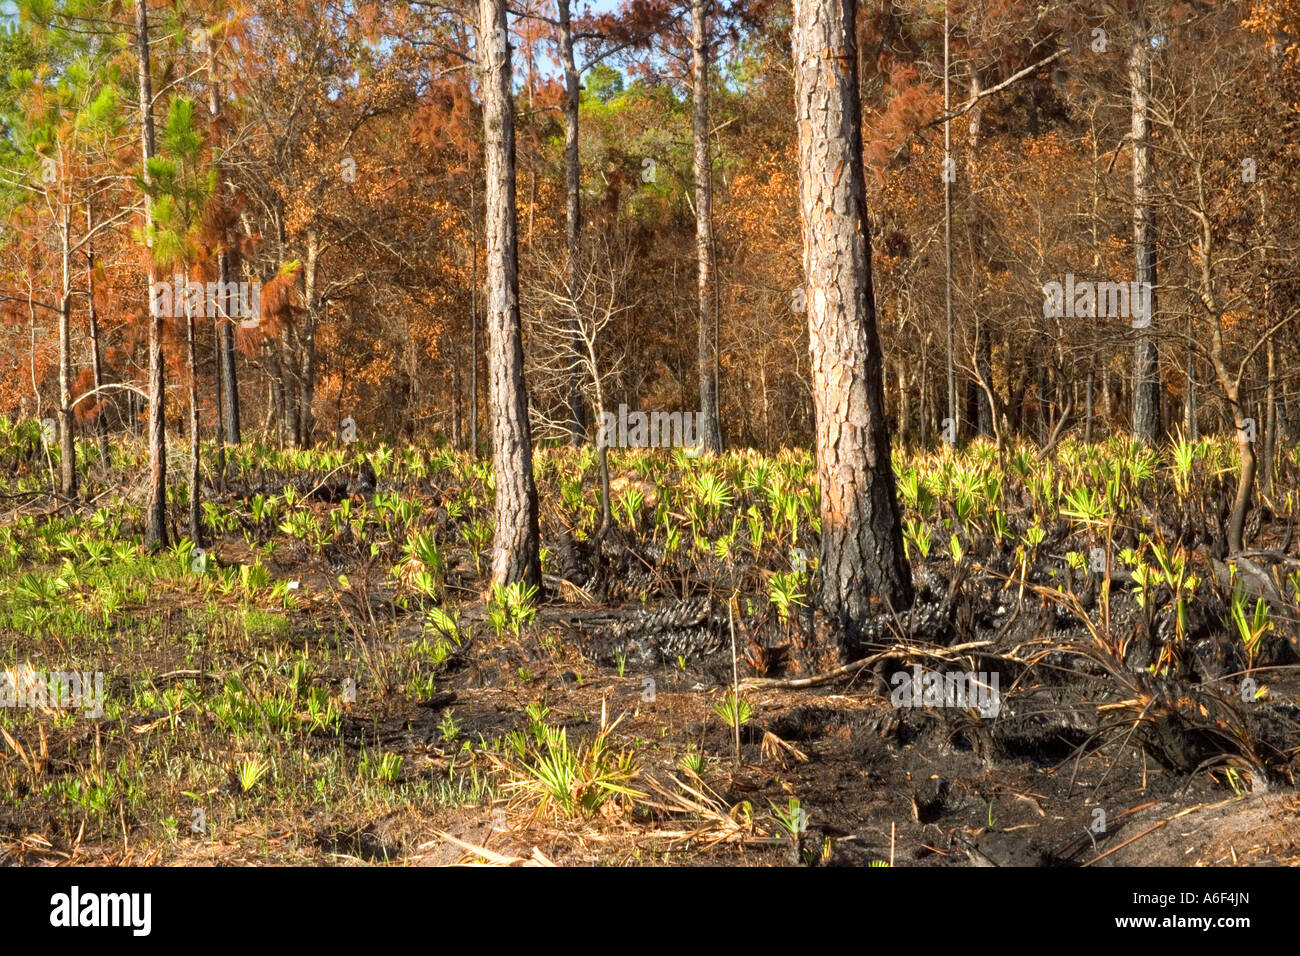 Controlled burn in Slash Southern Yellow Pine & Hardwood forest, Florida Stock Photo